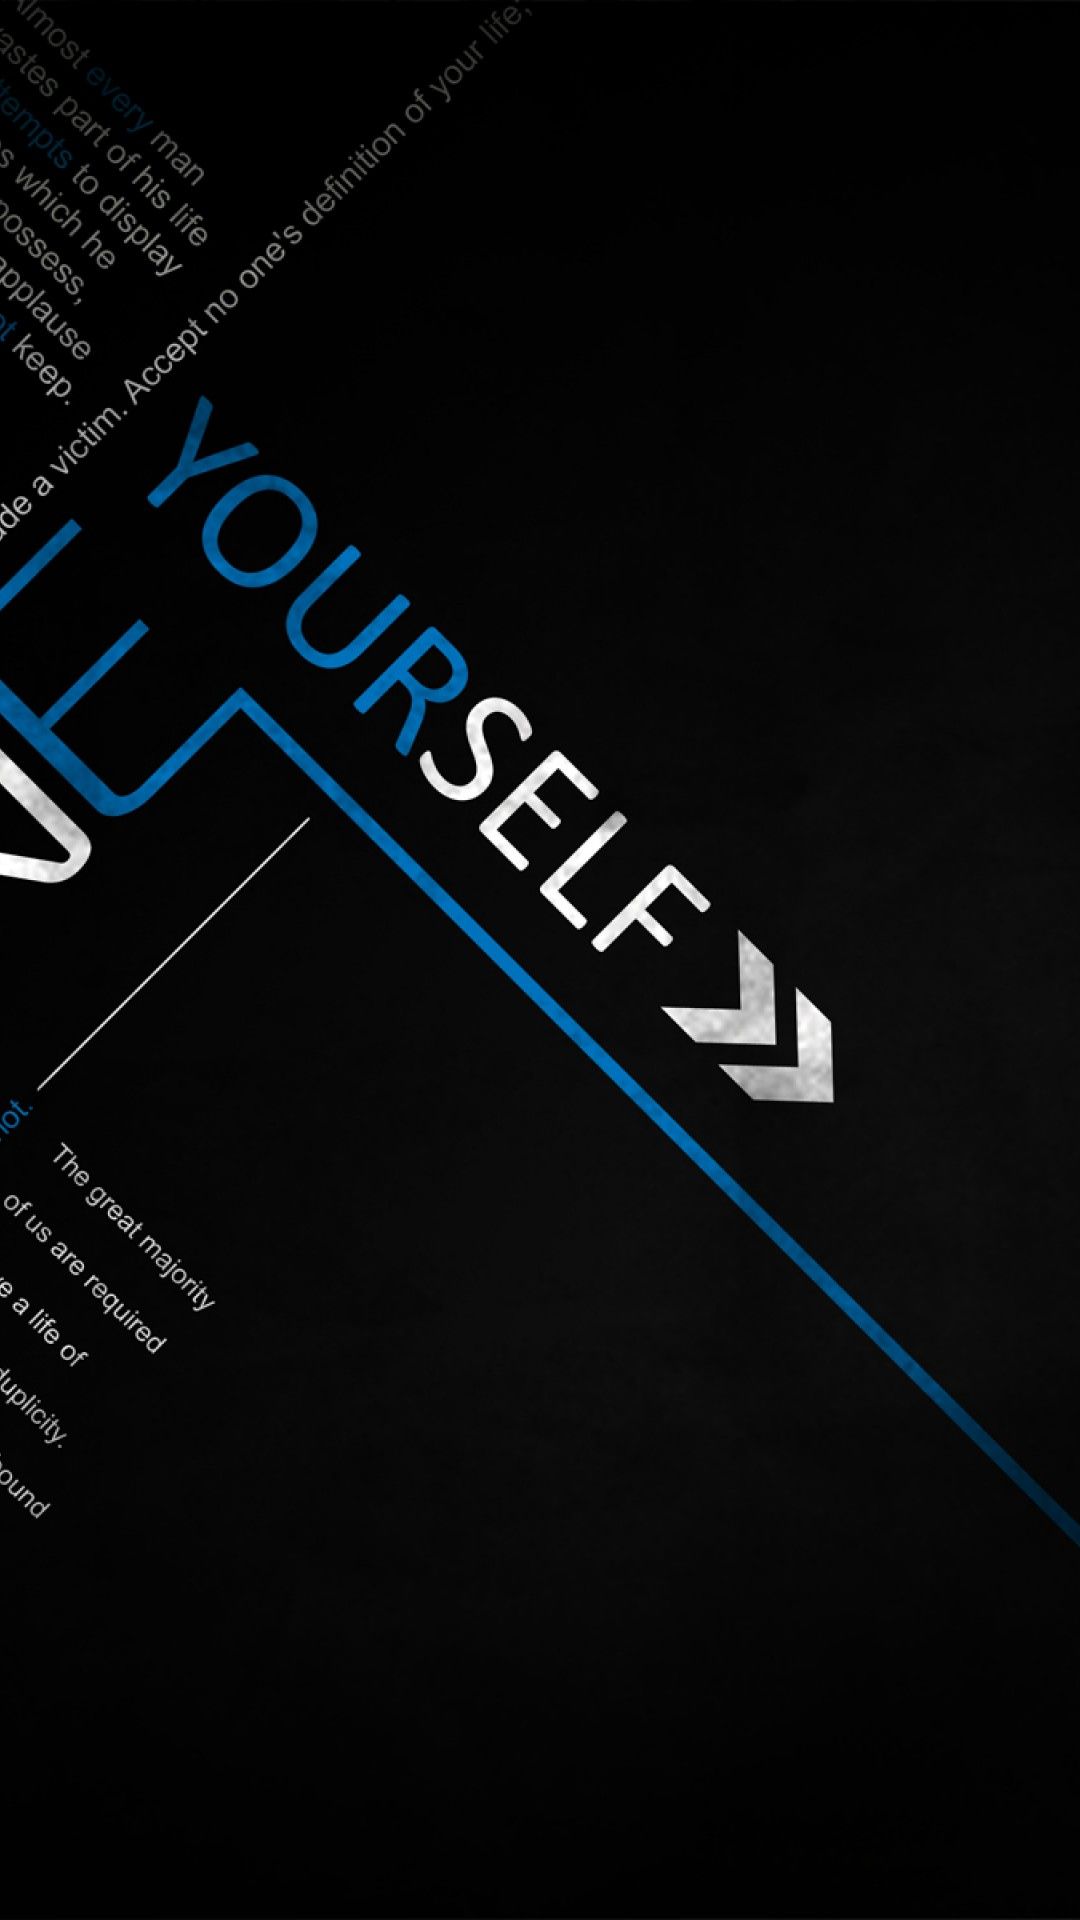 Define Yourself Success Quote Wallpaper for Desktop and Mobiles